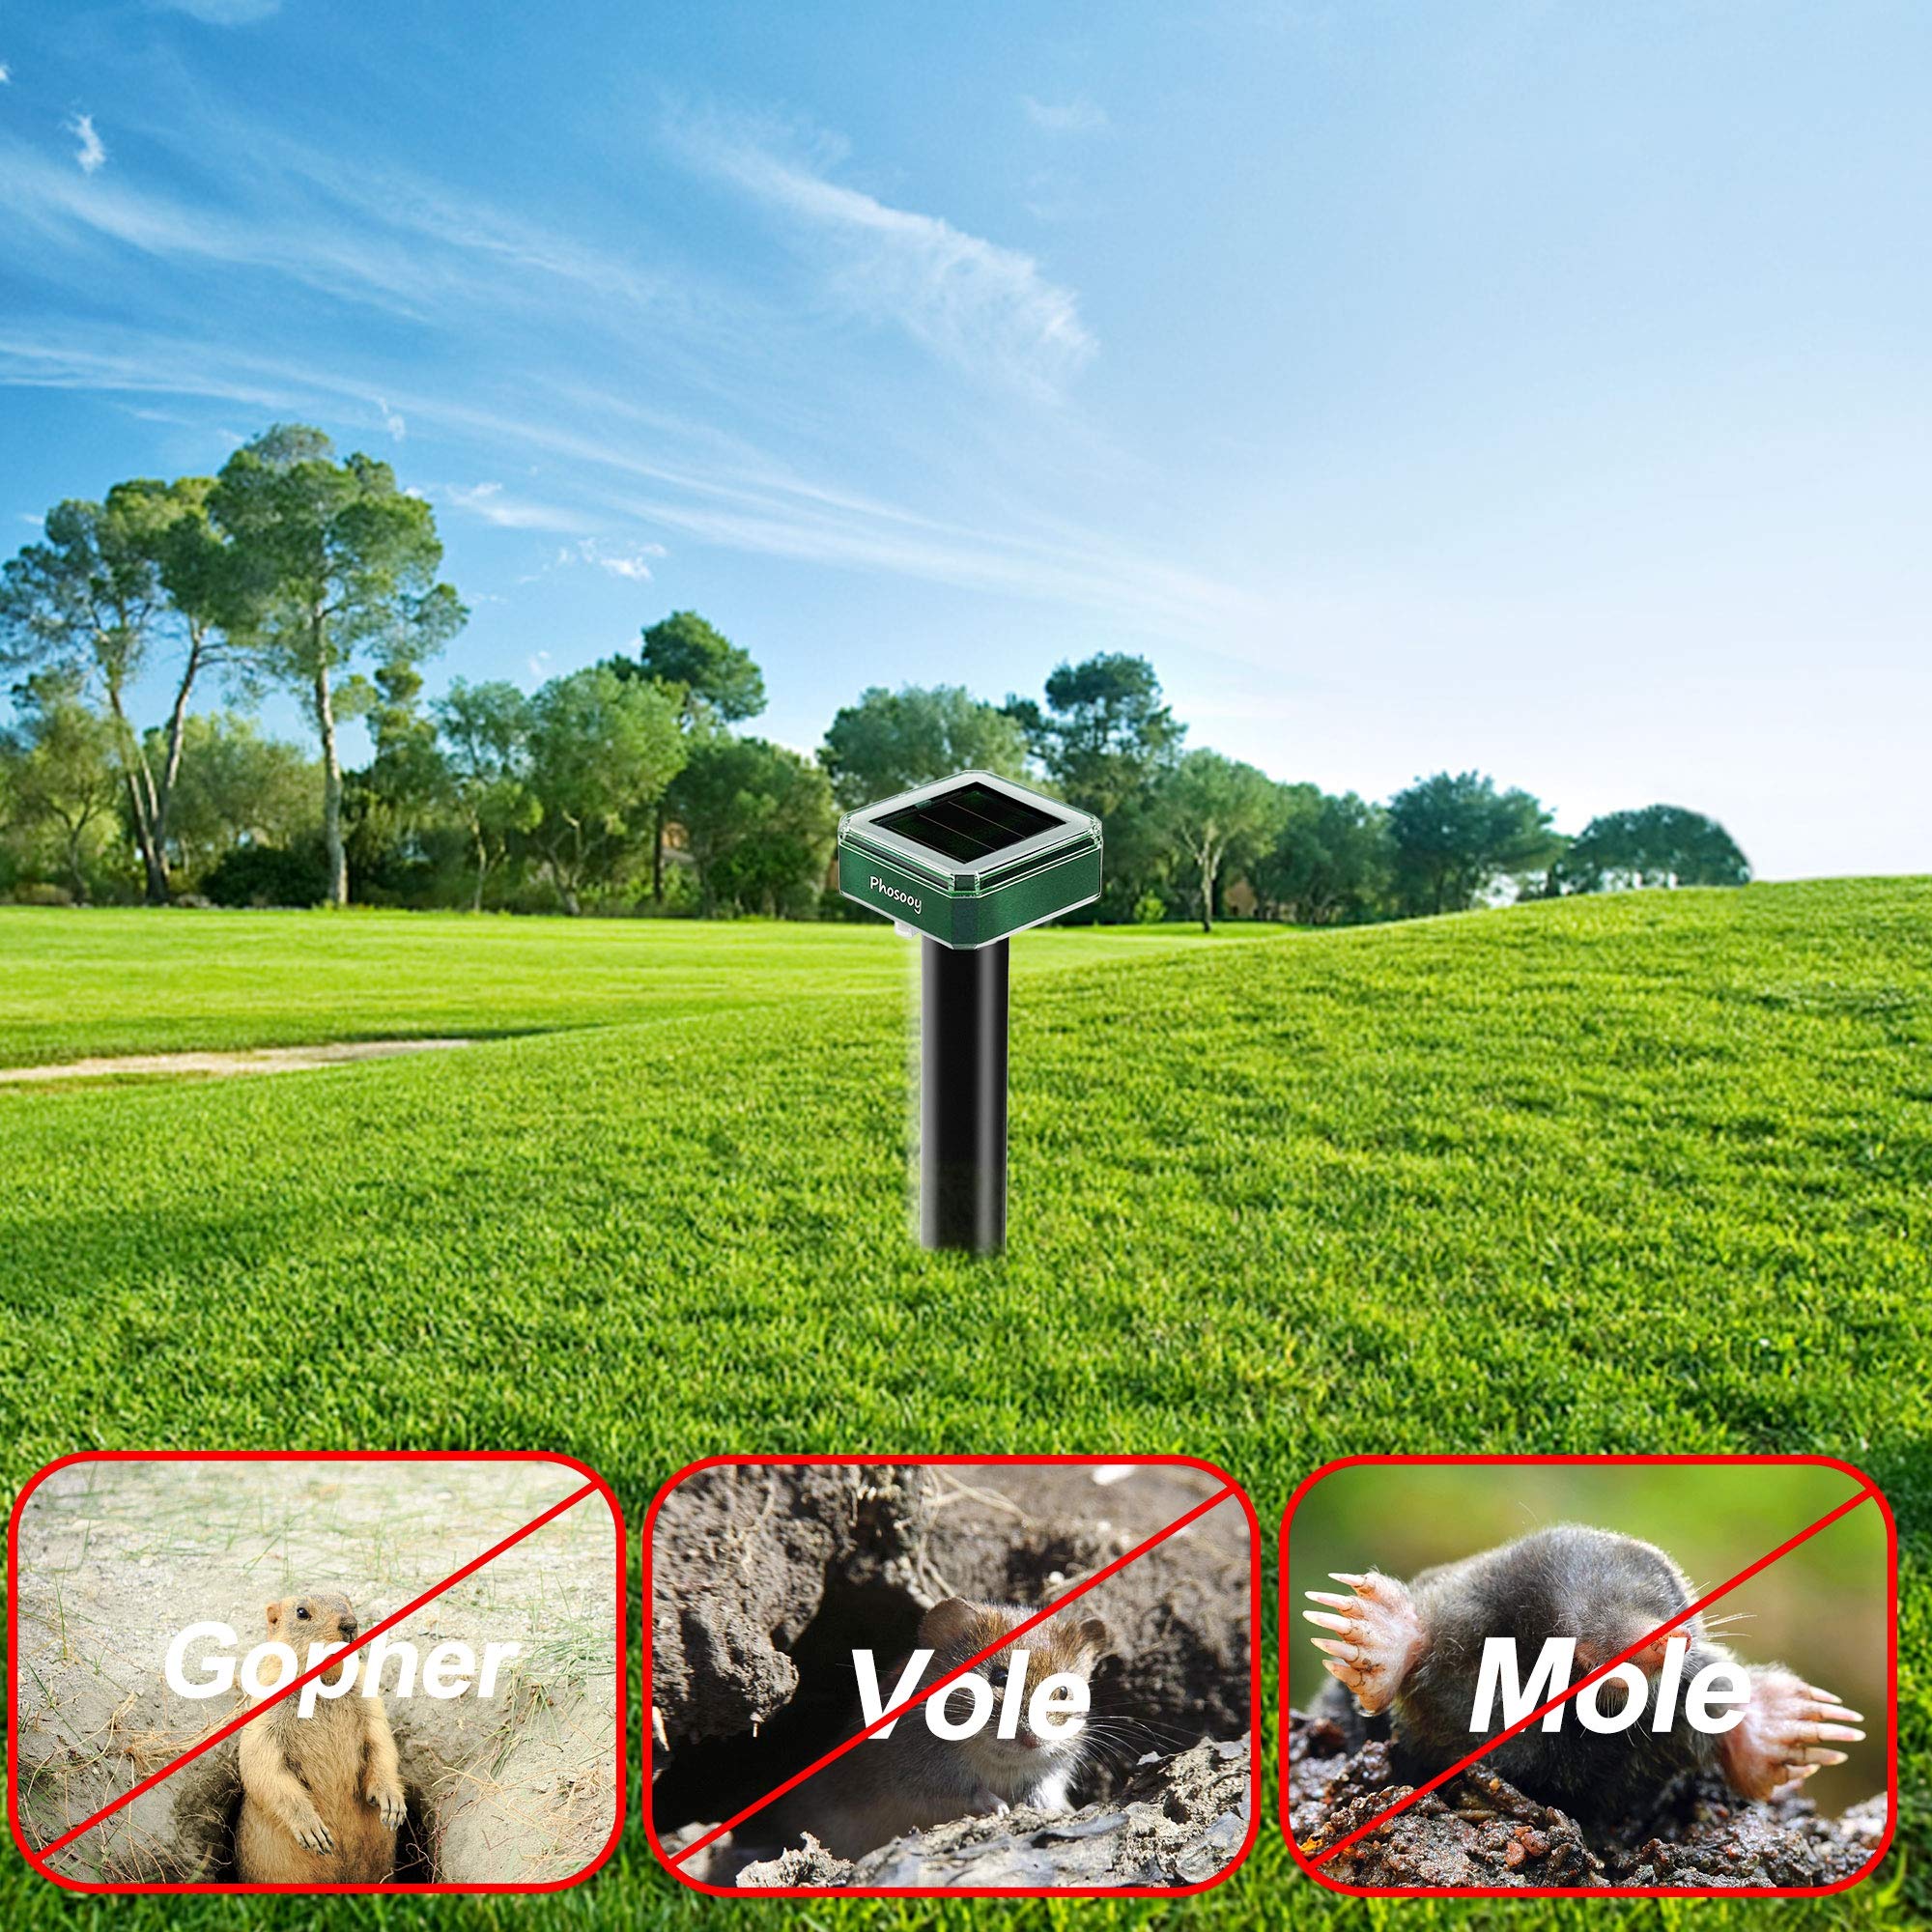 Phosooy Solar Mole Repellent Stakes, 8 Pack Solar Powered Ultrasonic Snake Gopher Deterrent Spikes, Waterproof Solar Rodent Voles Gopher Chipmunk Repellent for Lawn, Garden, Farm Outdoor Use